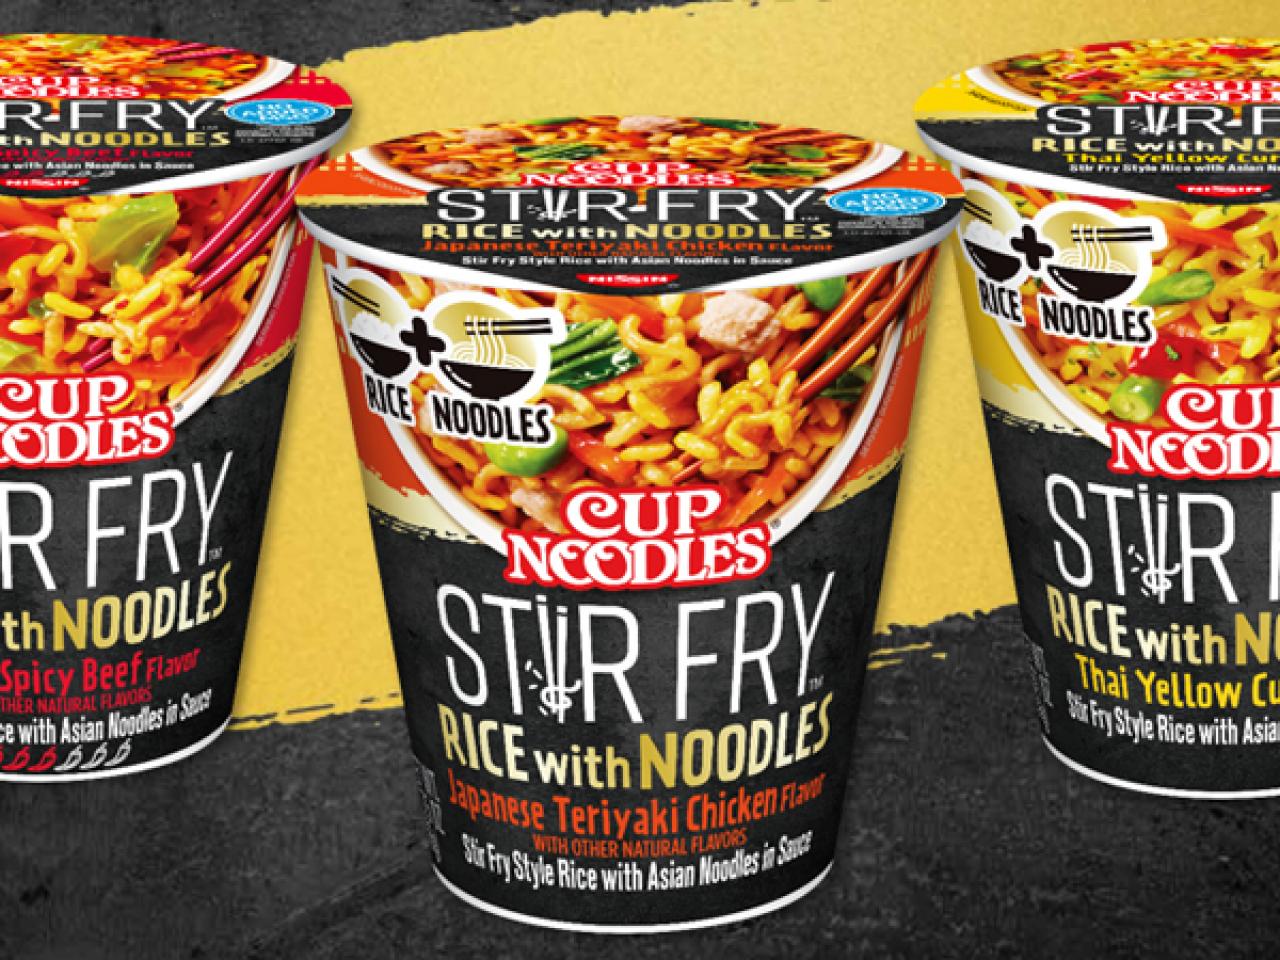 Cup Noodles Launches Stir Fry Rice With Noodles Fn Dish Behind The Scenes Food Trends And